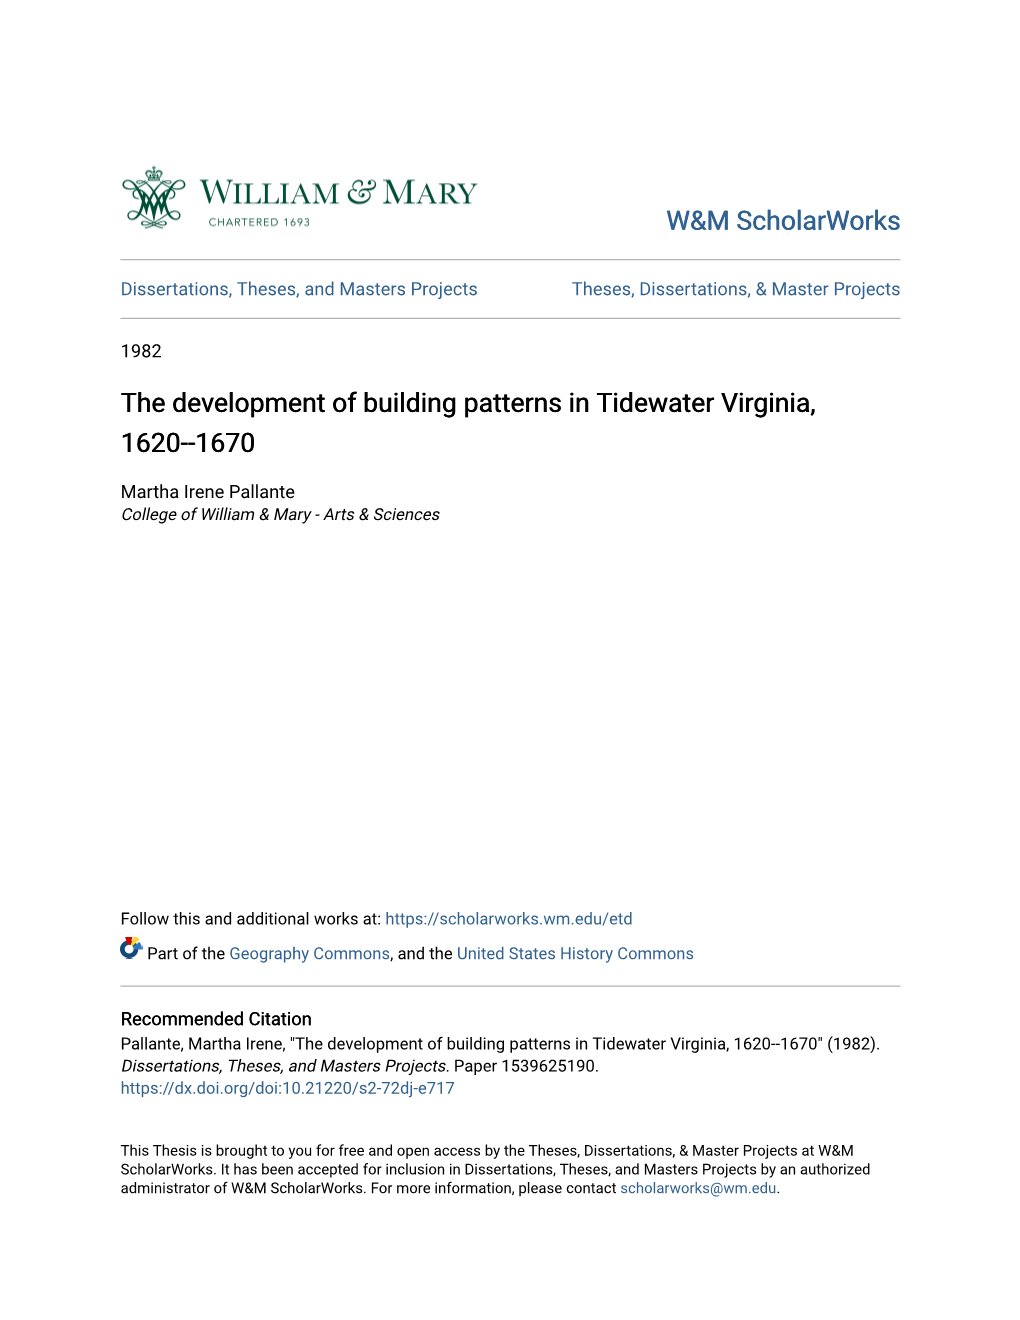 The Development of Building Patterns in Tidewater Virginia, 1620--1670